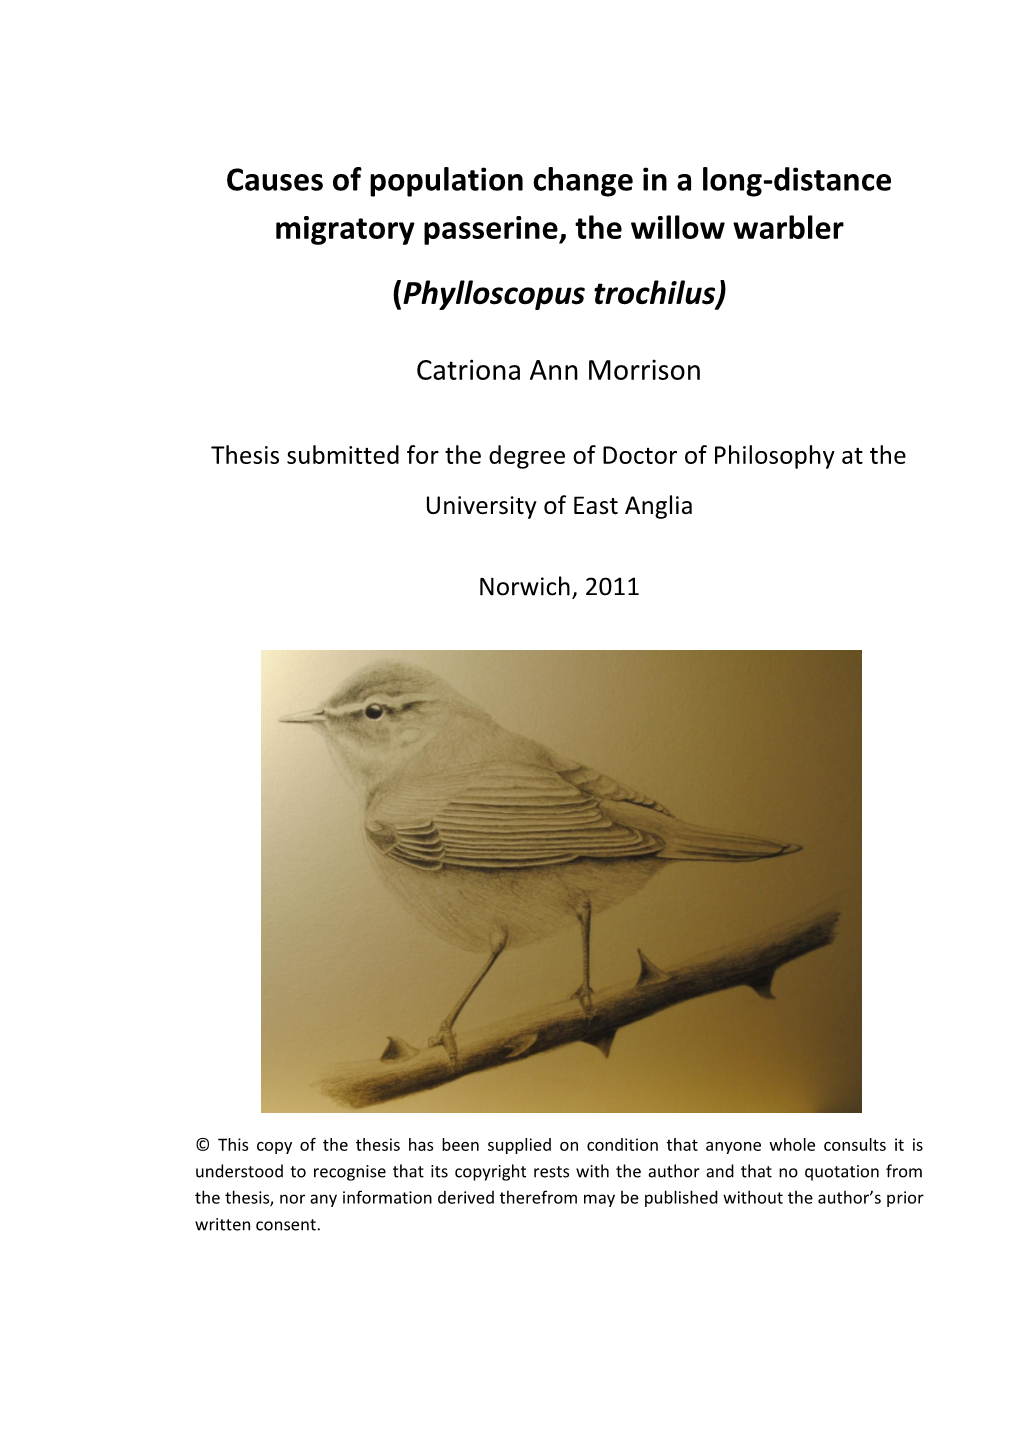 Causes of Population Change in a Long-Distance Migratory Passerine, the Willow Warbler (Phylloscopus Trochilus)